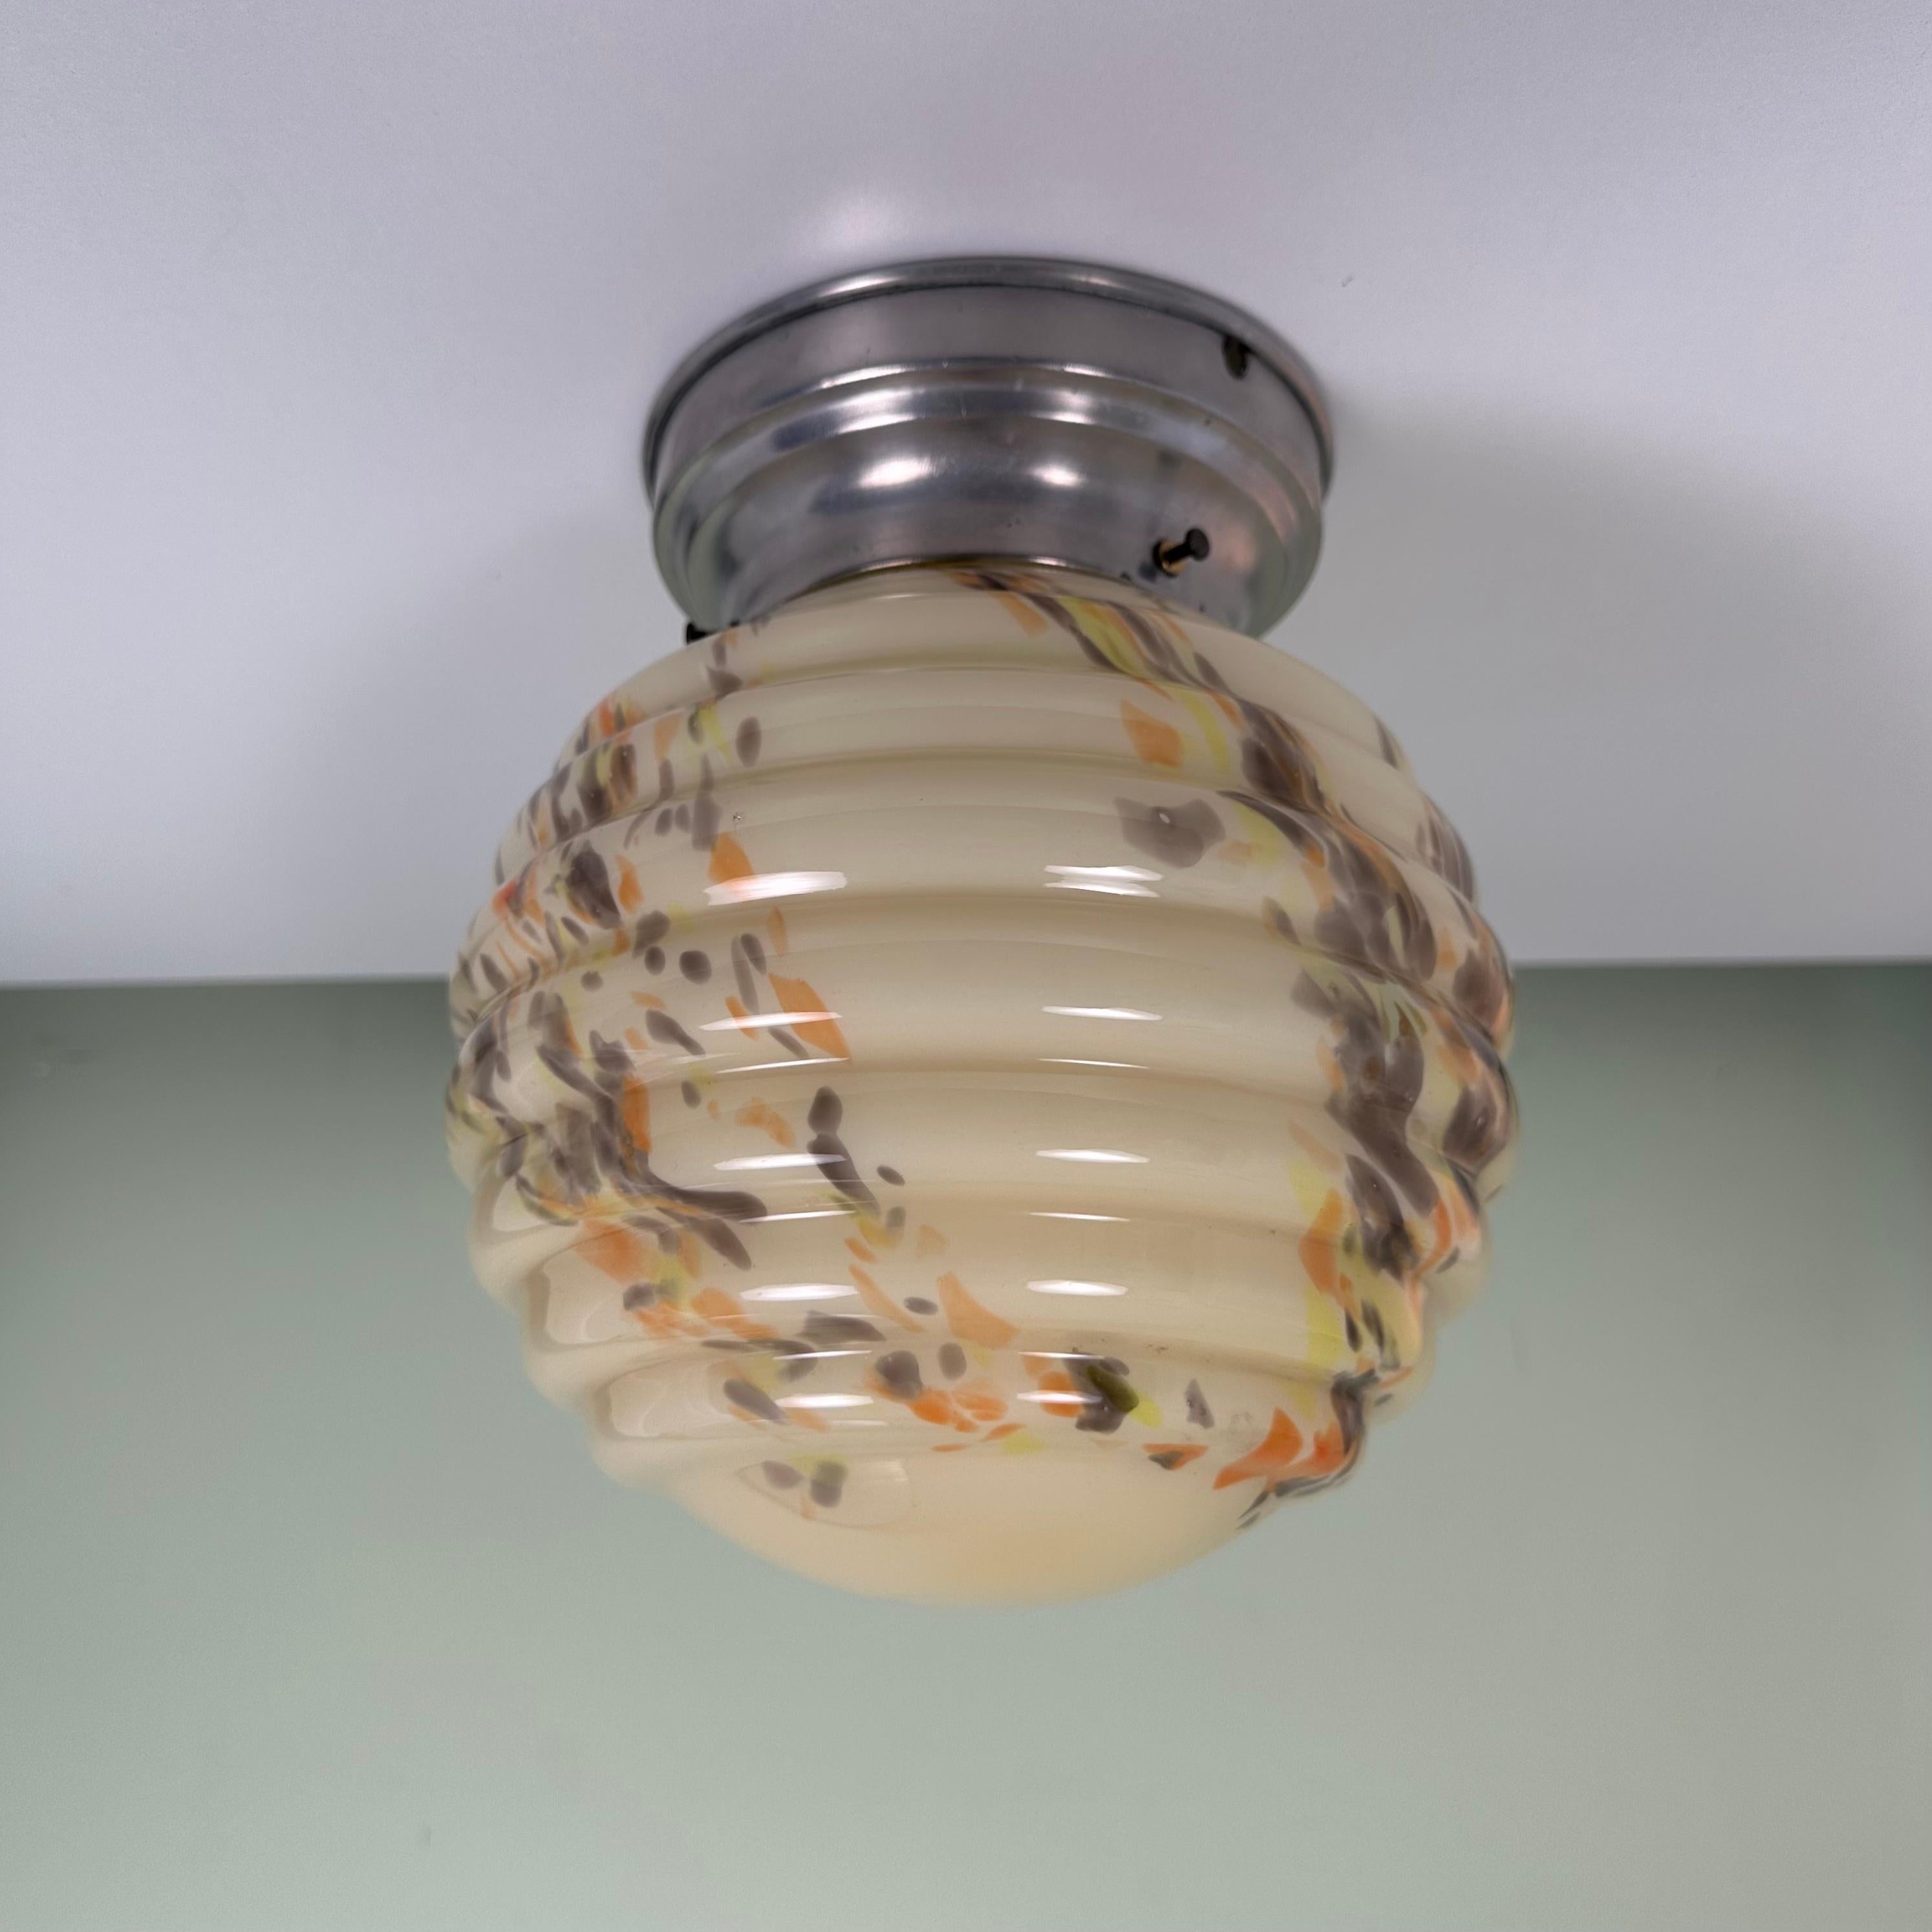 Vintage glass globe flush mount light. The perfect midcentury color scheme meets an Art Deco Shape. A cream colored base with tie-dye-esque colorful inclusions. The colors are orange, neon yellow, and smoke gray. As these colors overlap, slight